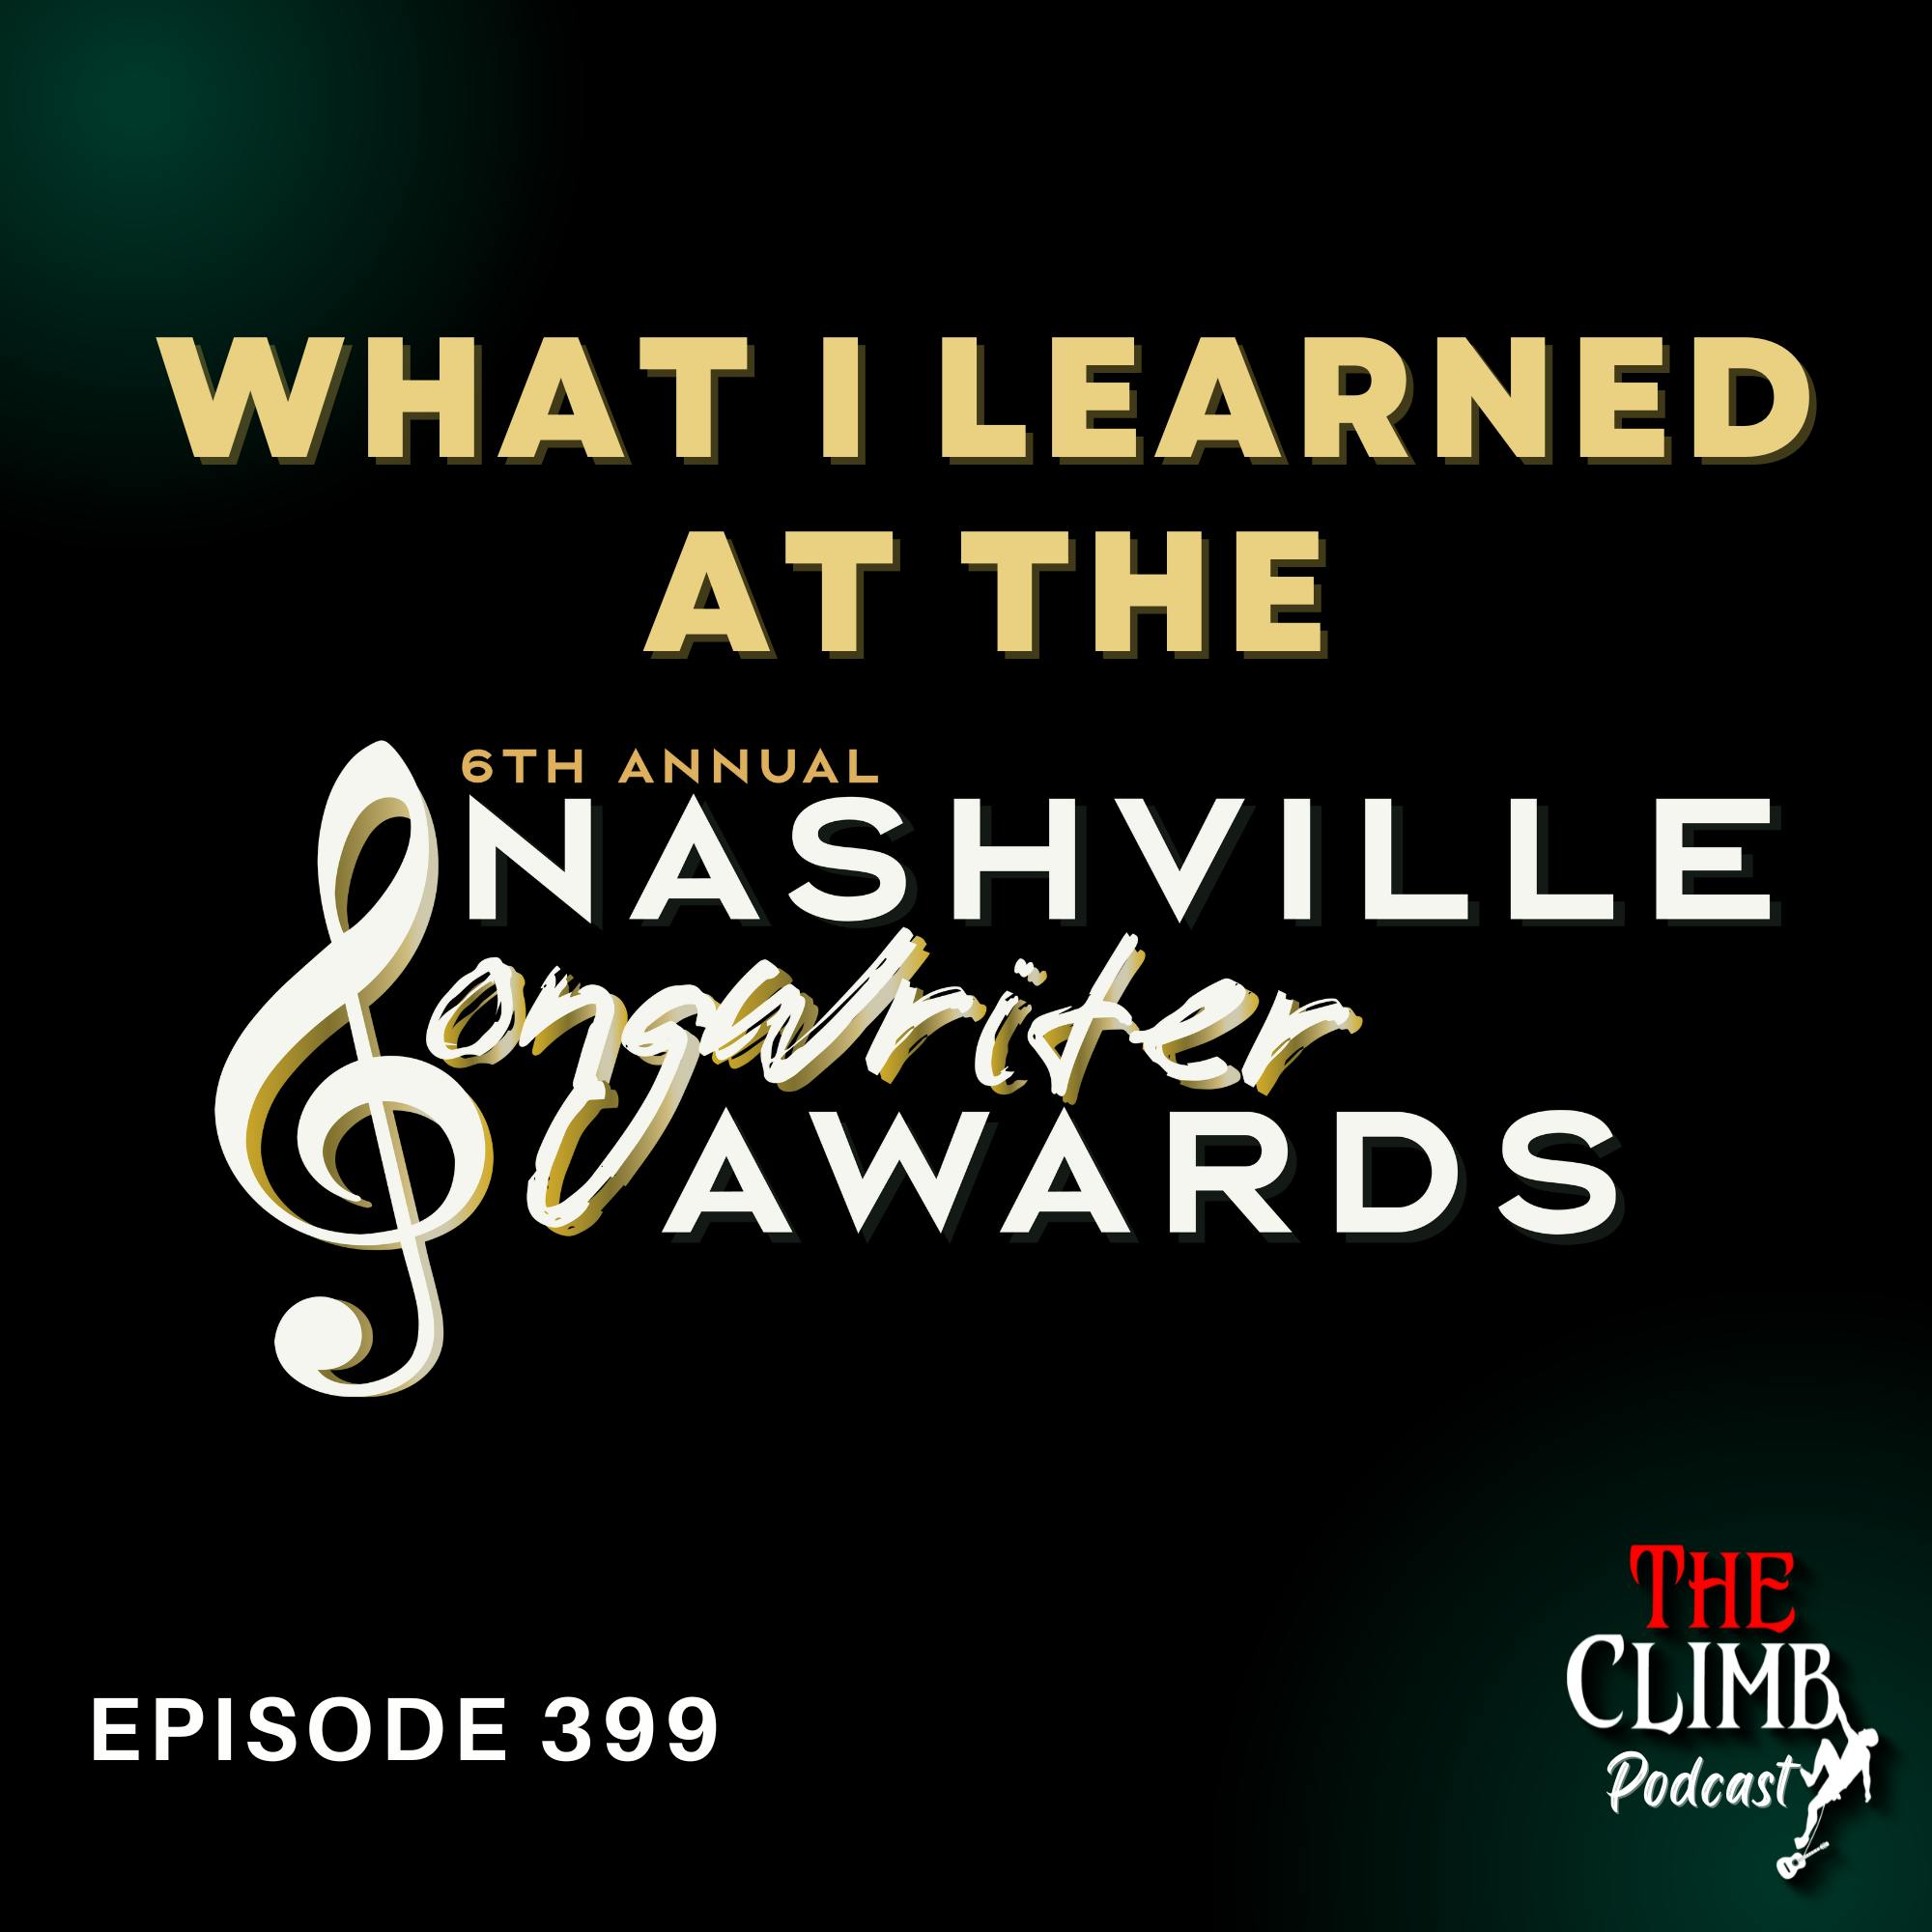 Ep 399: What I Learned At The Nashville Songwriting Awards